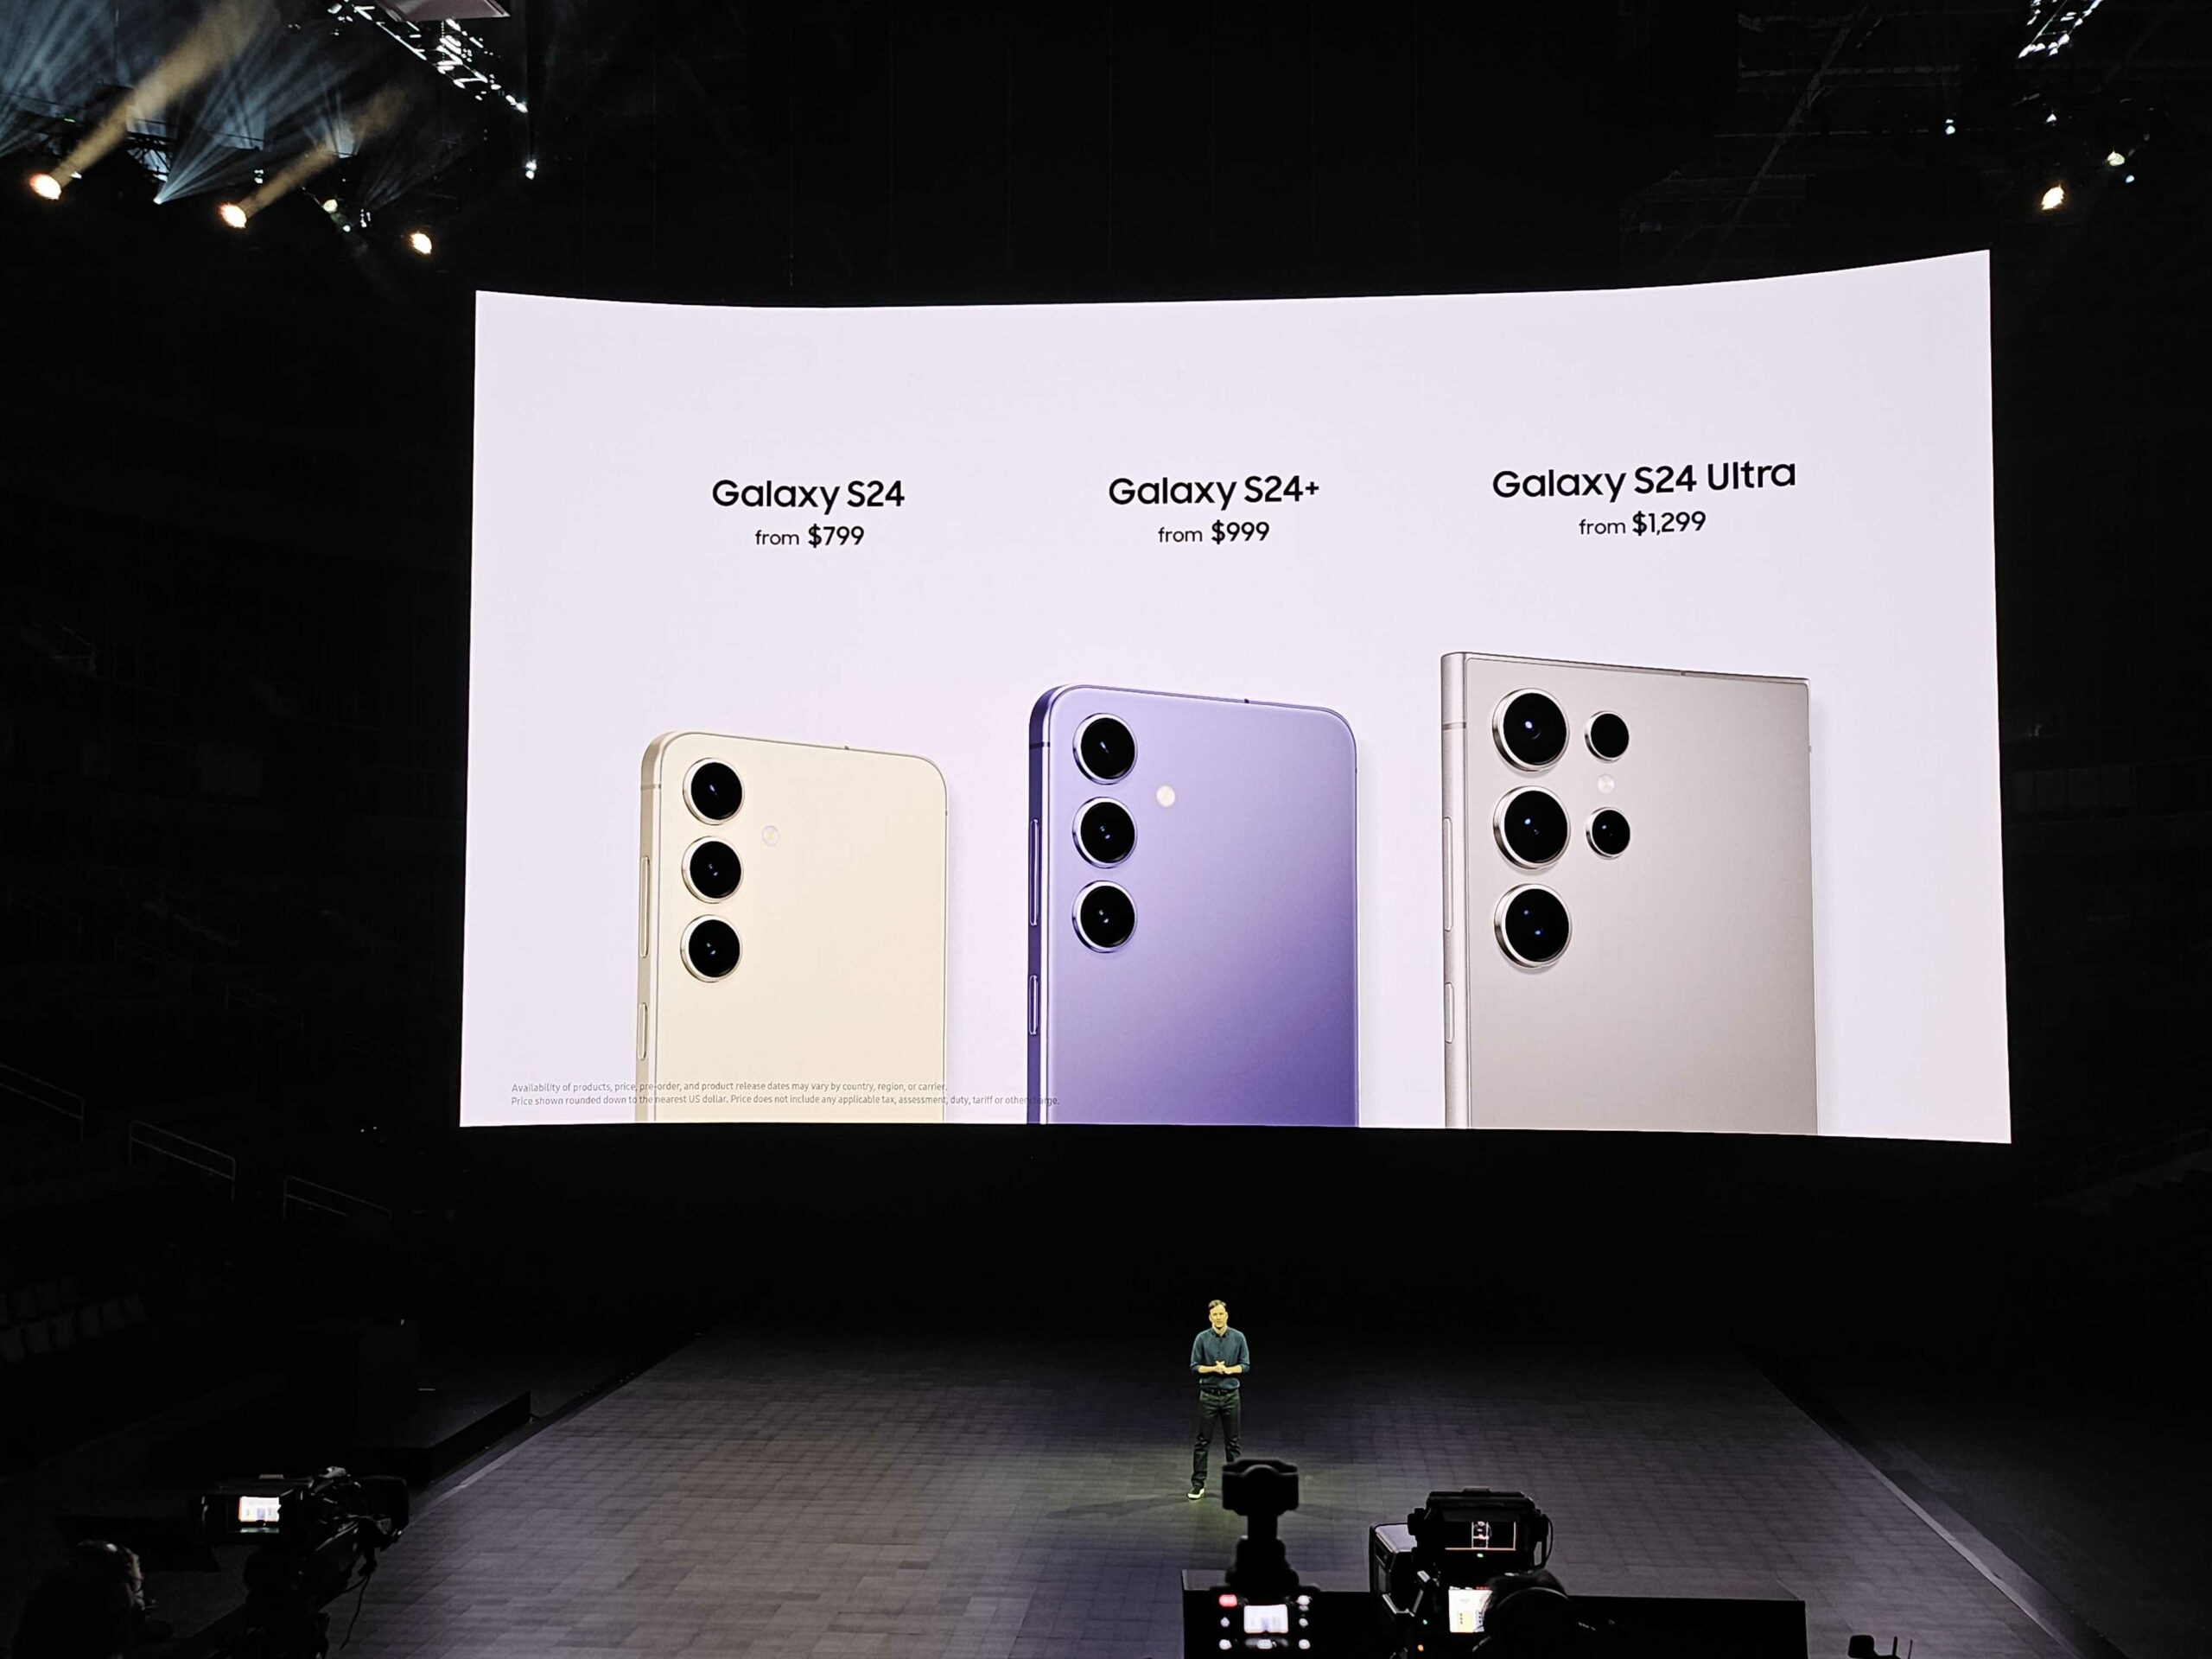 Galaxy S24 Series Announced With AI Features And Seven OS Upgrades